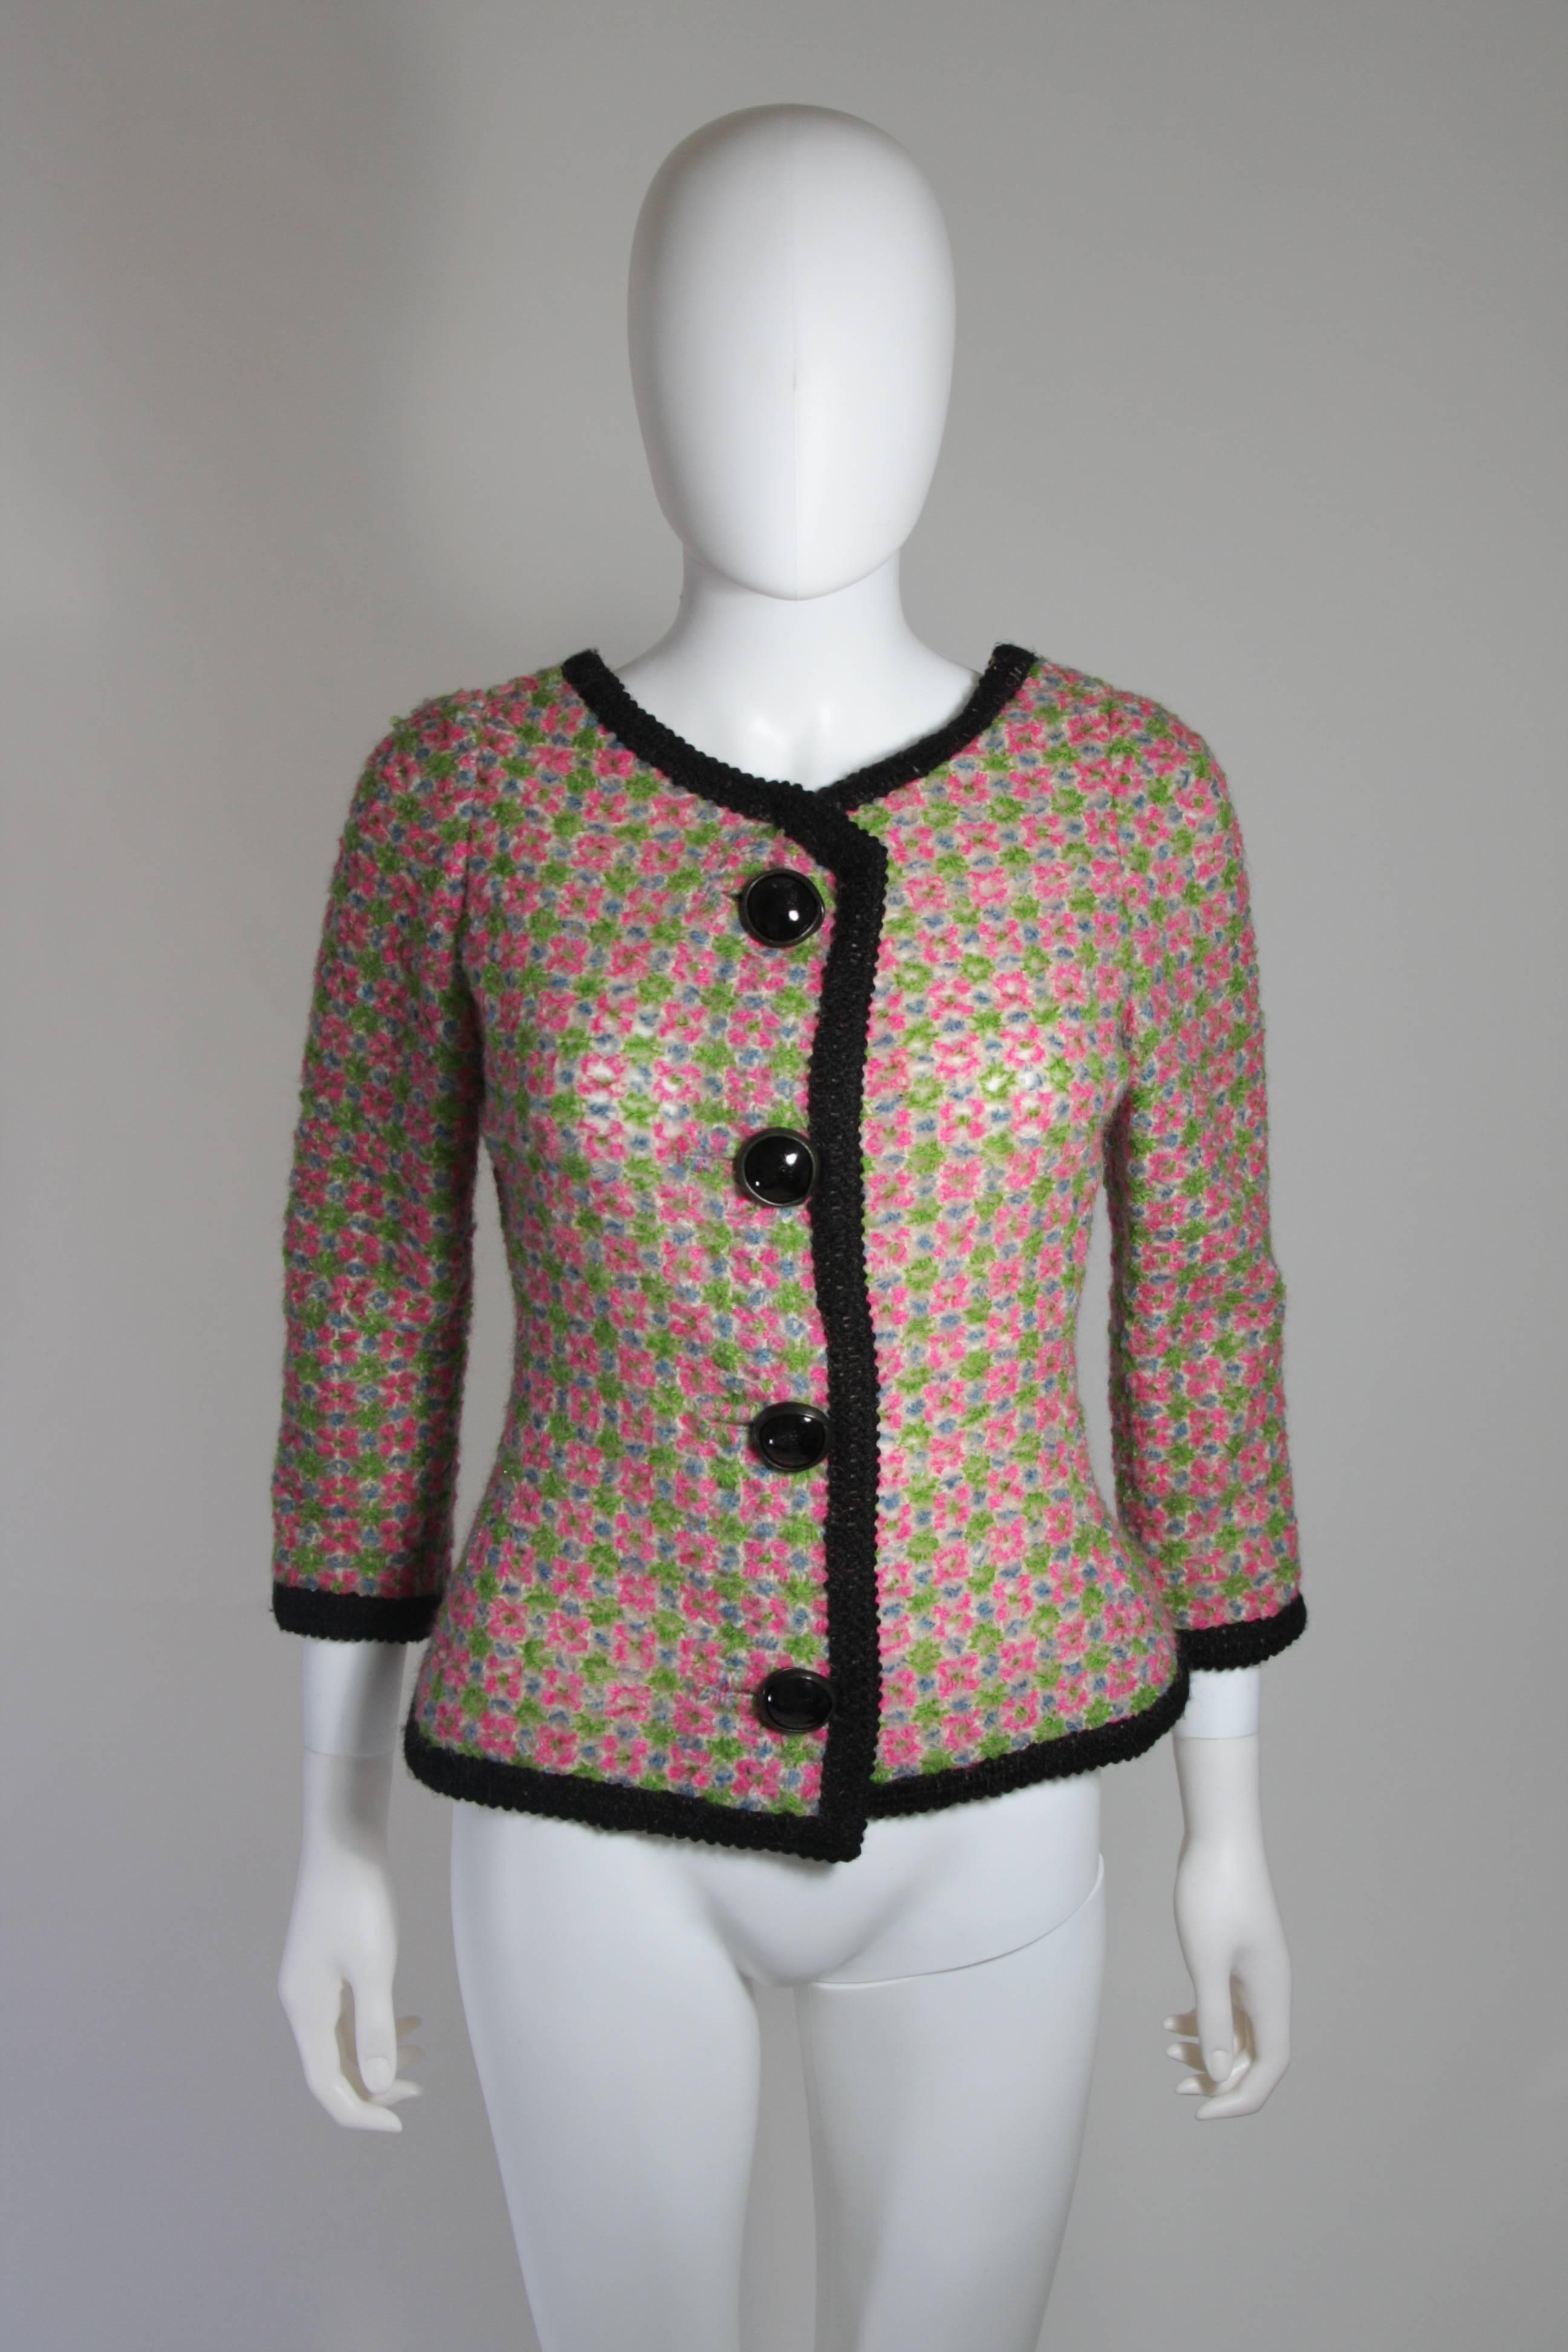 Women's Galanos Wool Skirt Suit in Green Pink White and Black Size Small Medium For Sale